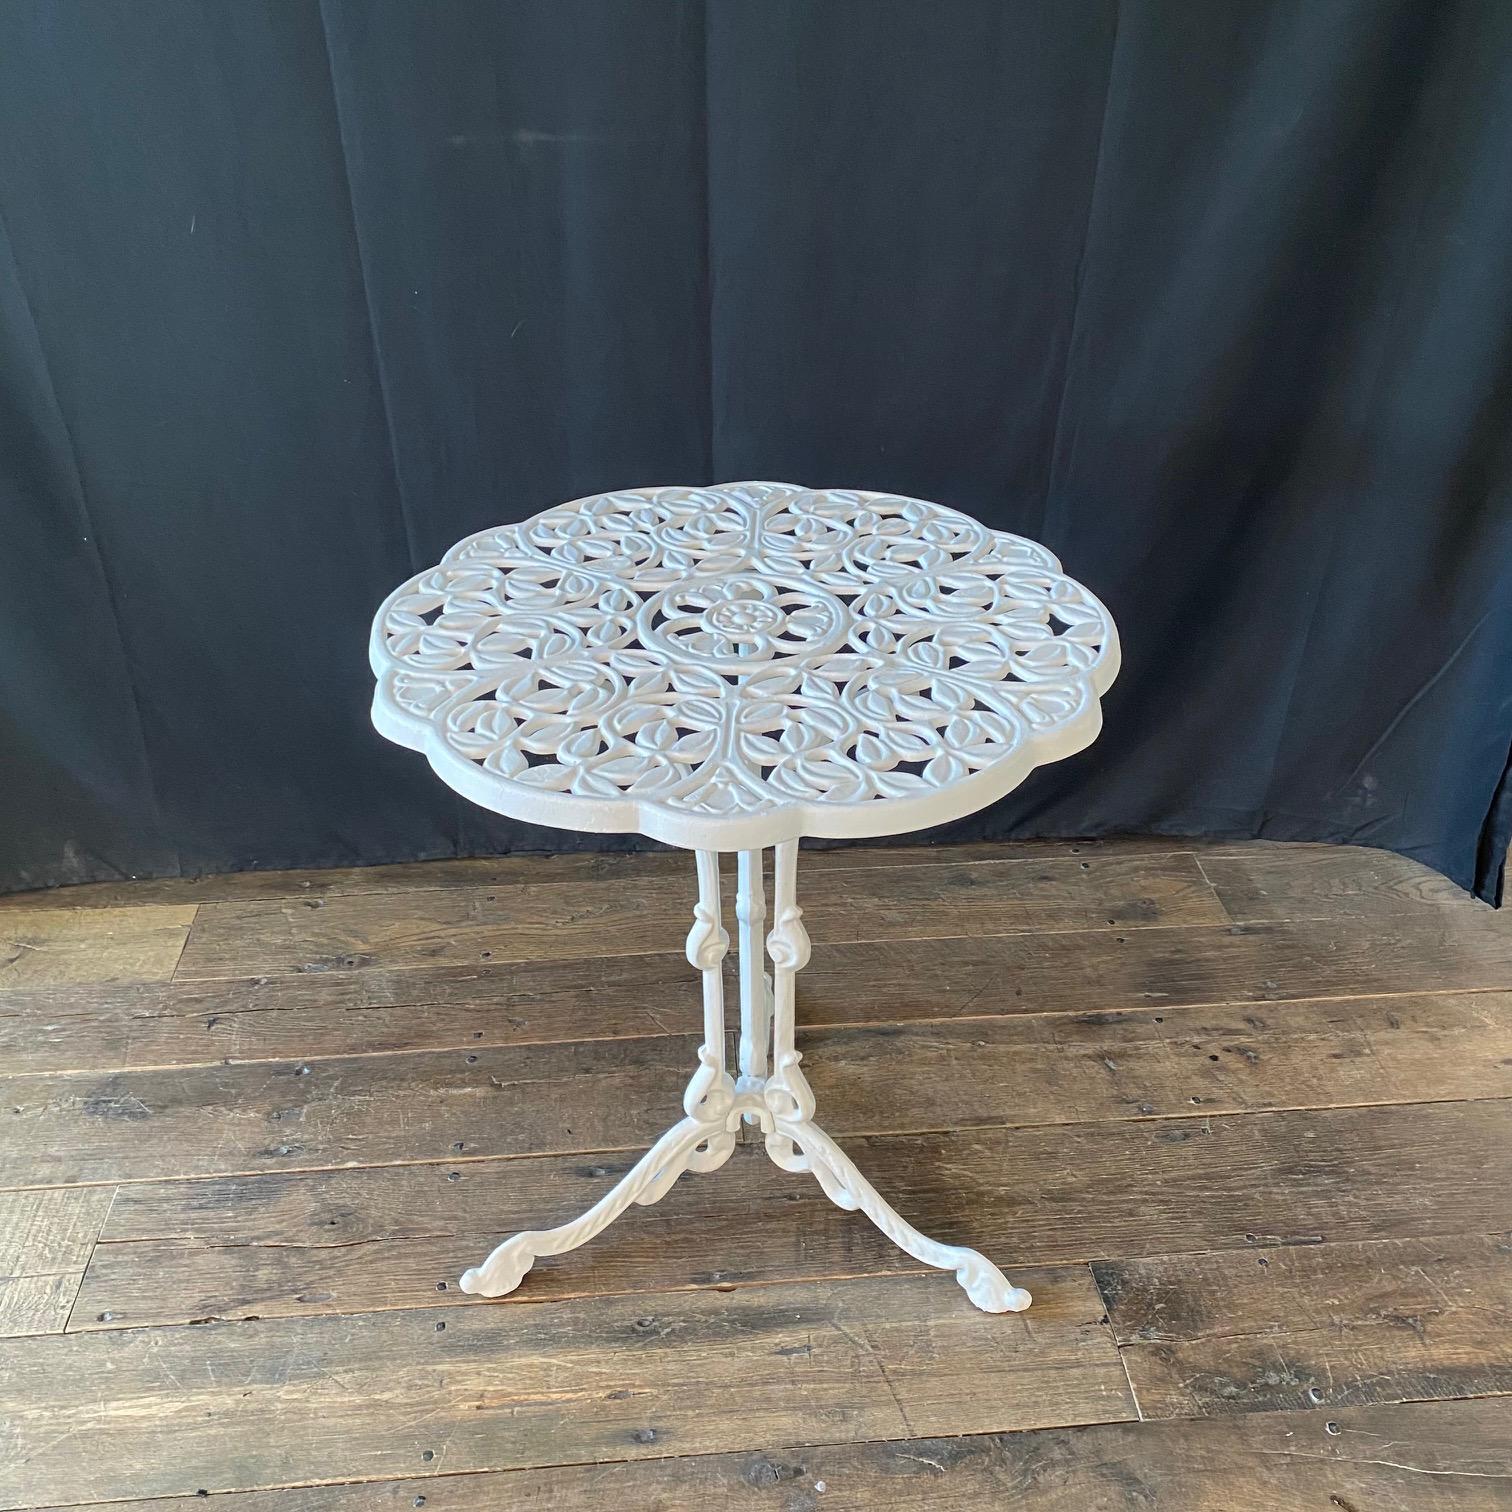 A great addition to your outdoor patio or garden, this lovely British sturdy, durable metal cast aluminum outdoor cafe, bistro or dining table provides ornate styling. Lovely sunflowers and tulips interwoven with vines in table top design. Three